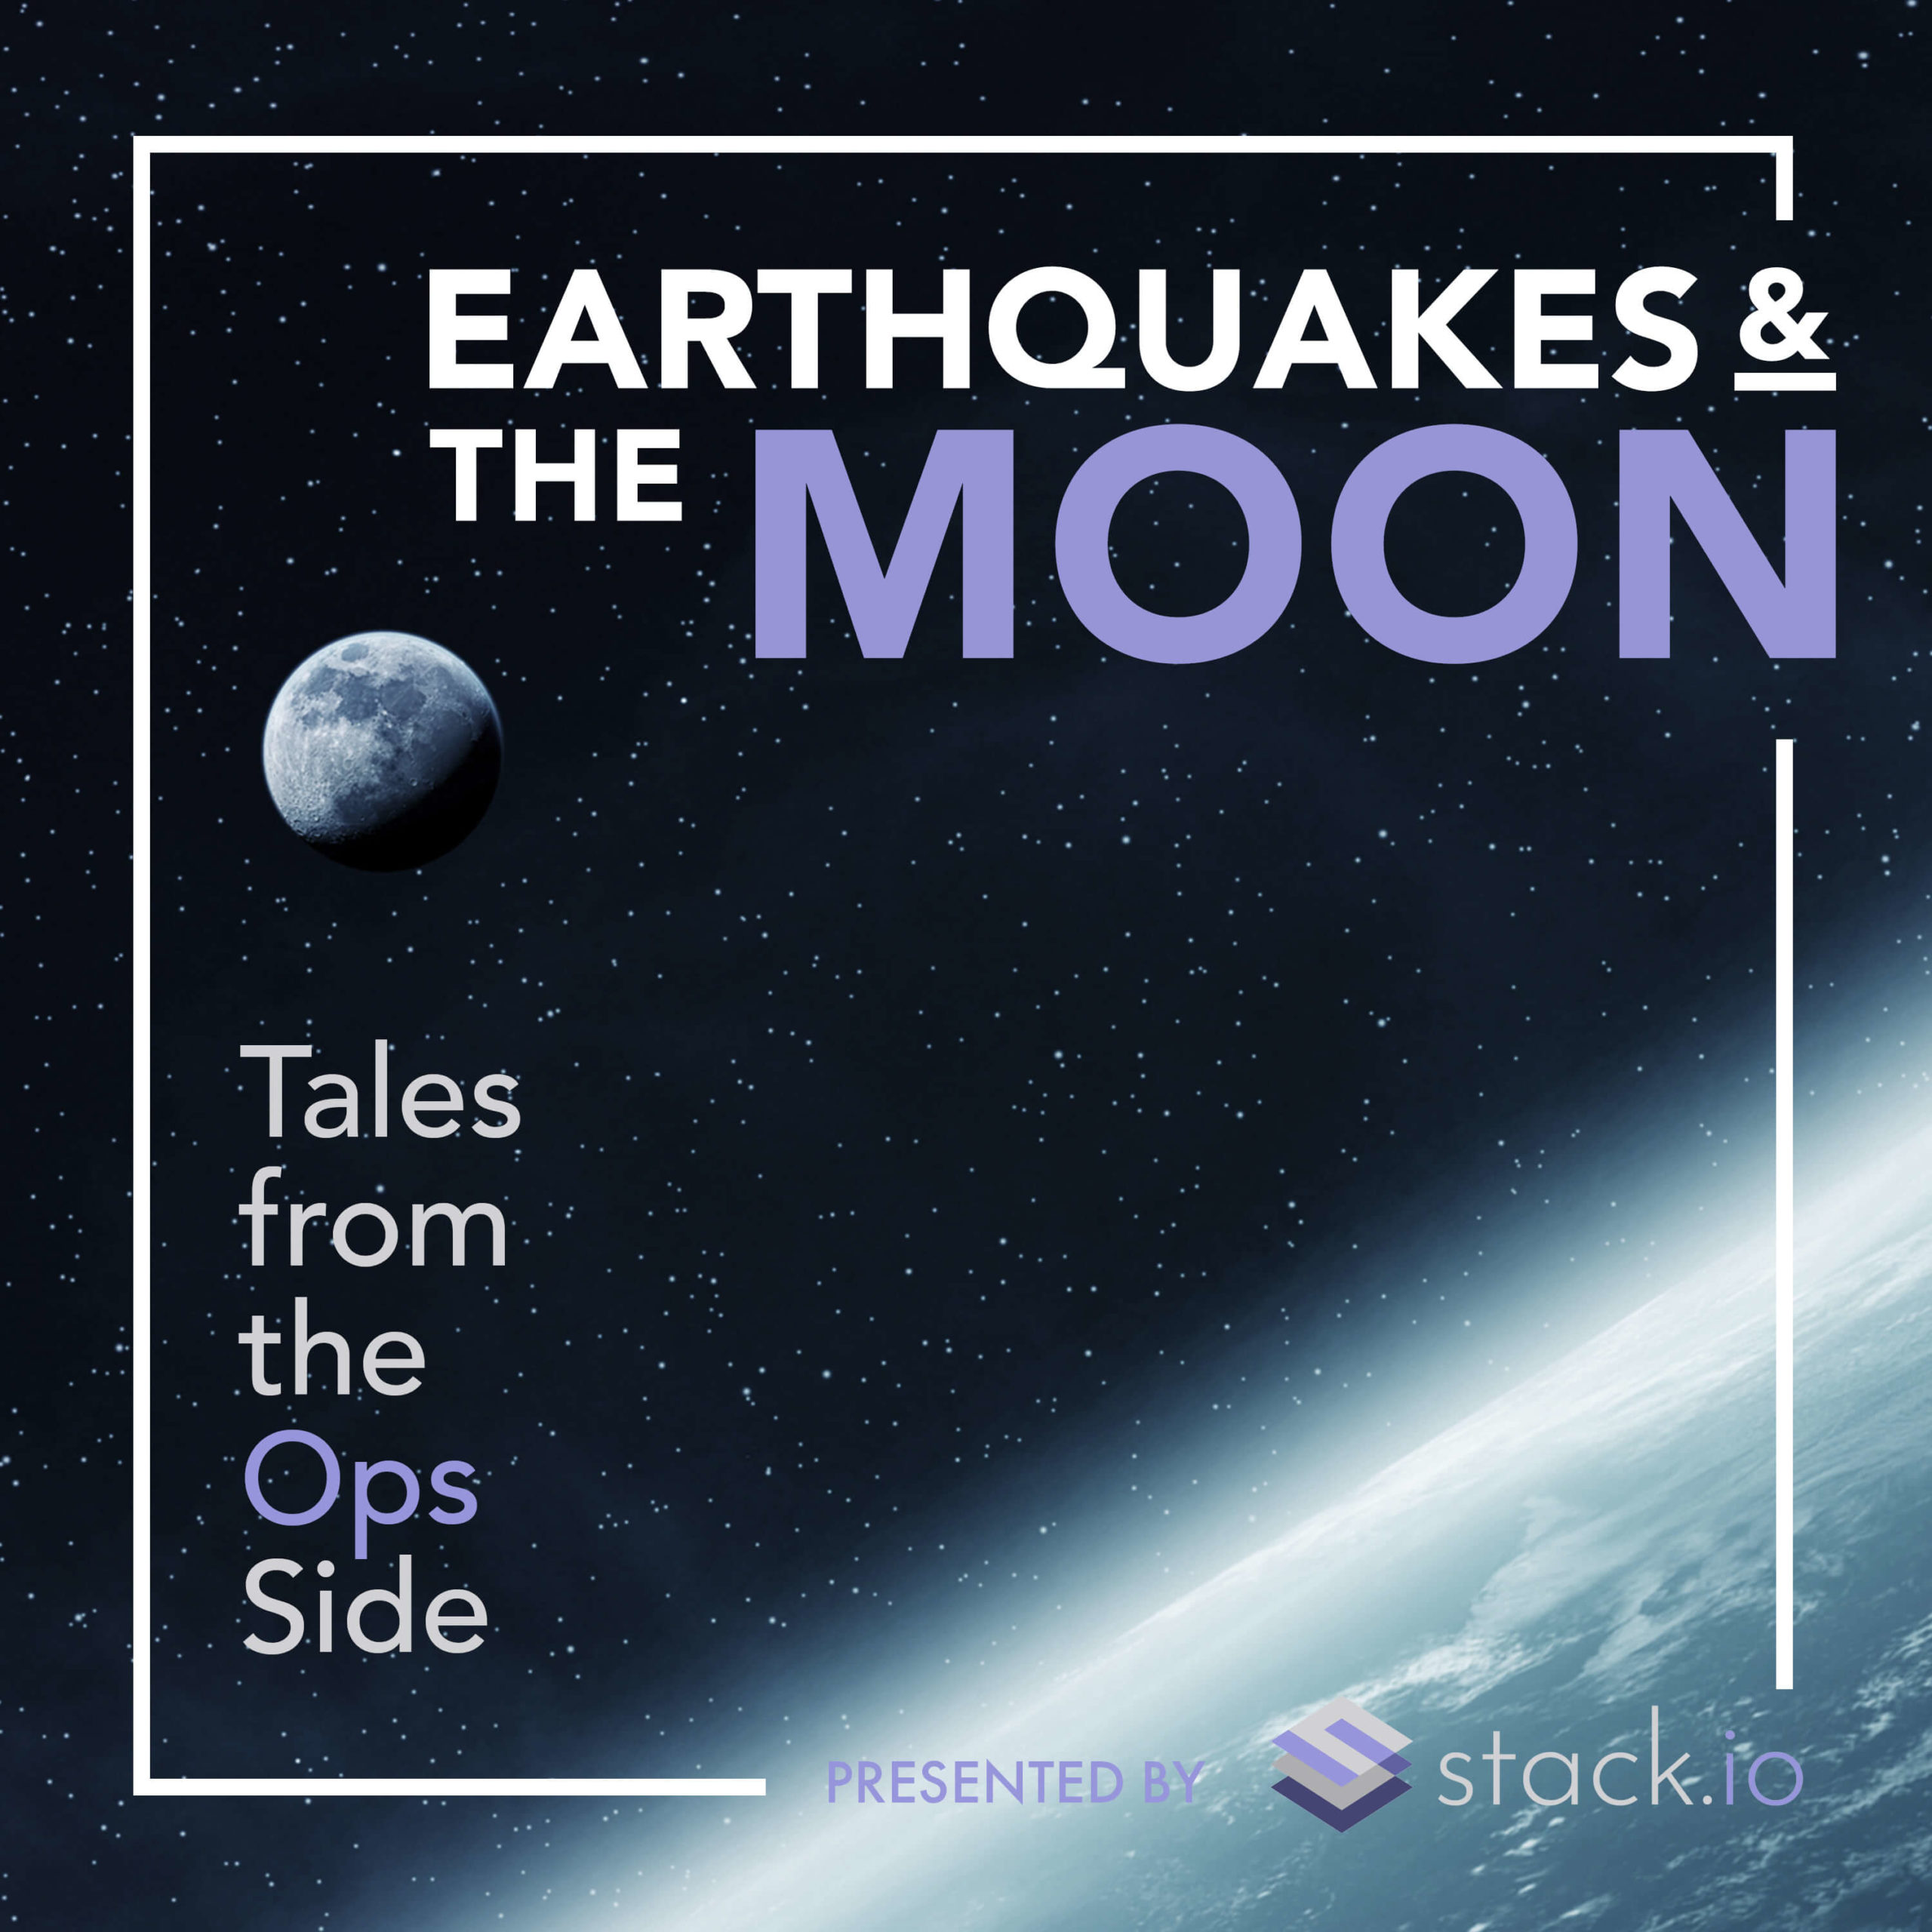 Tales from the Ops Side - Episode 2 - Earthquakes and the Moon